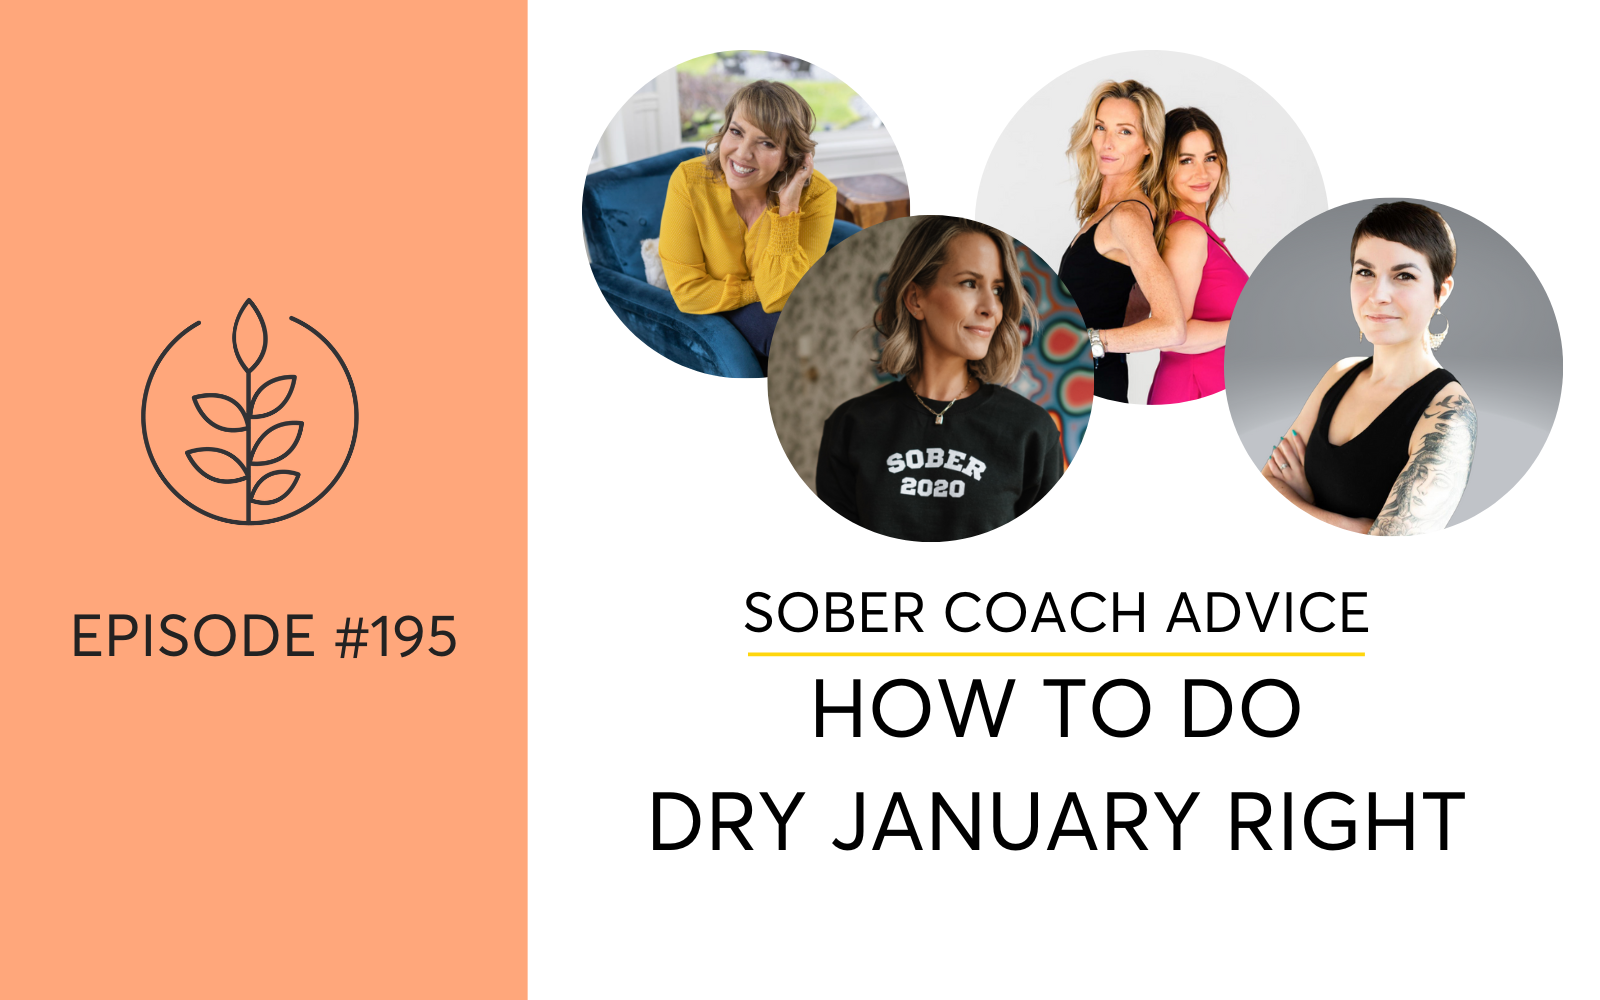 Sober Coach Advice On How To Do Dry January Right